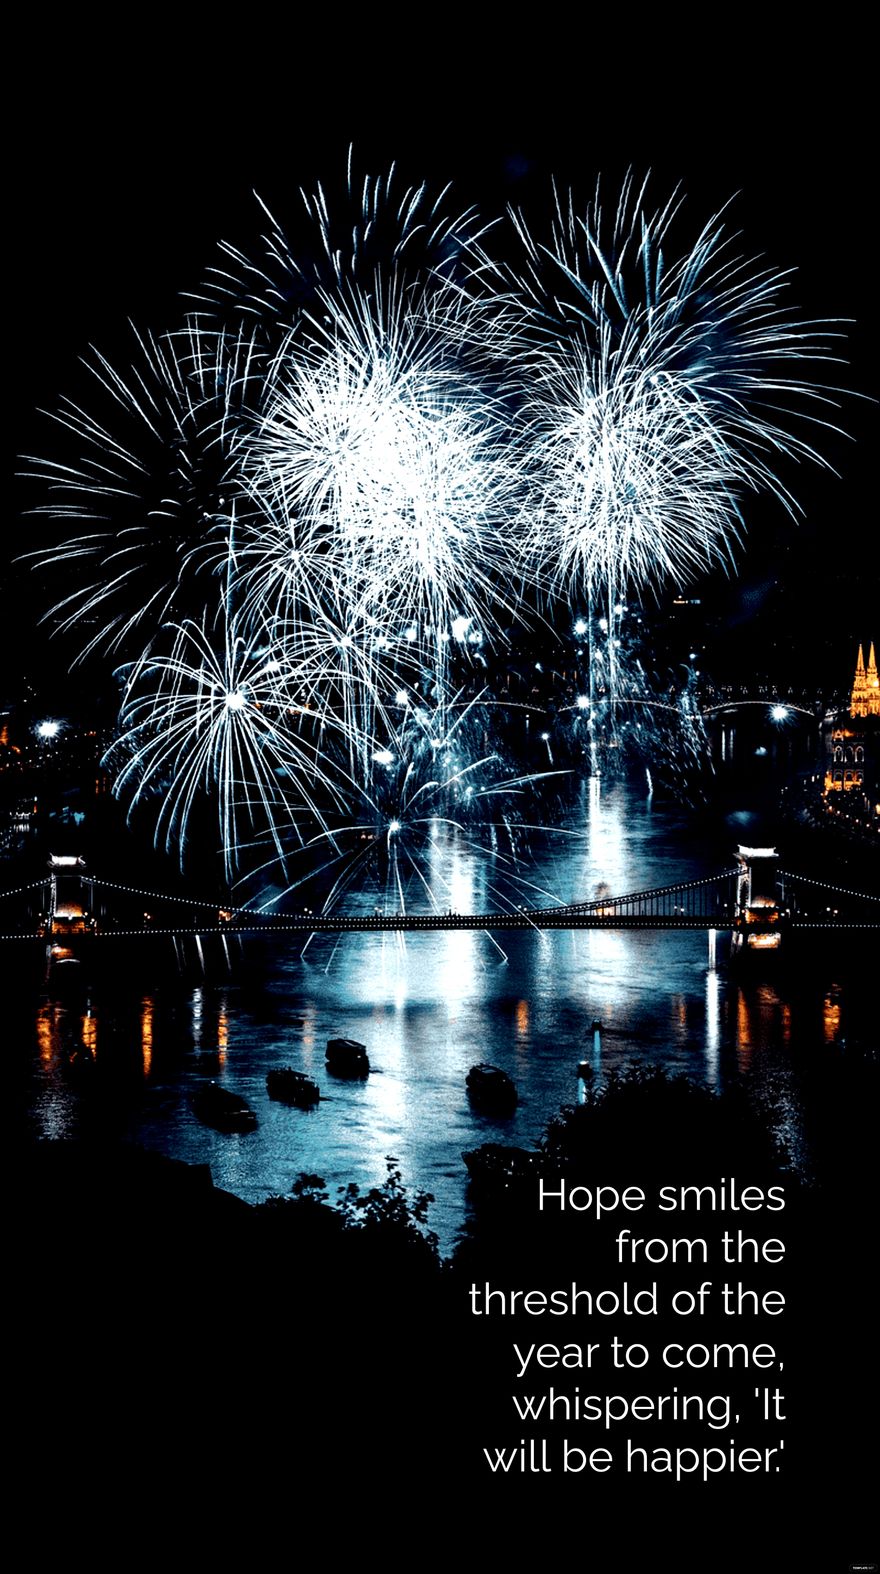 Free Hope smiles from the threshold of the year to come, whispering, 'It will be happier'.